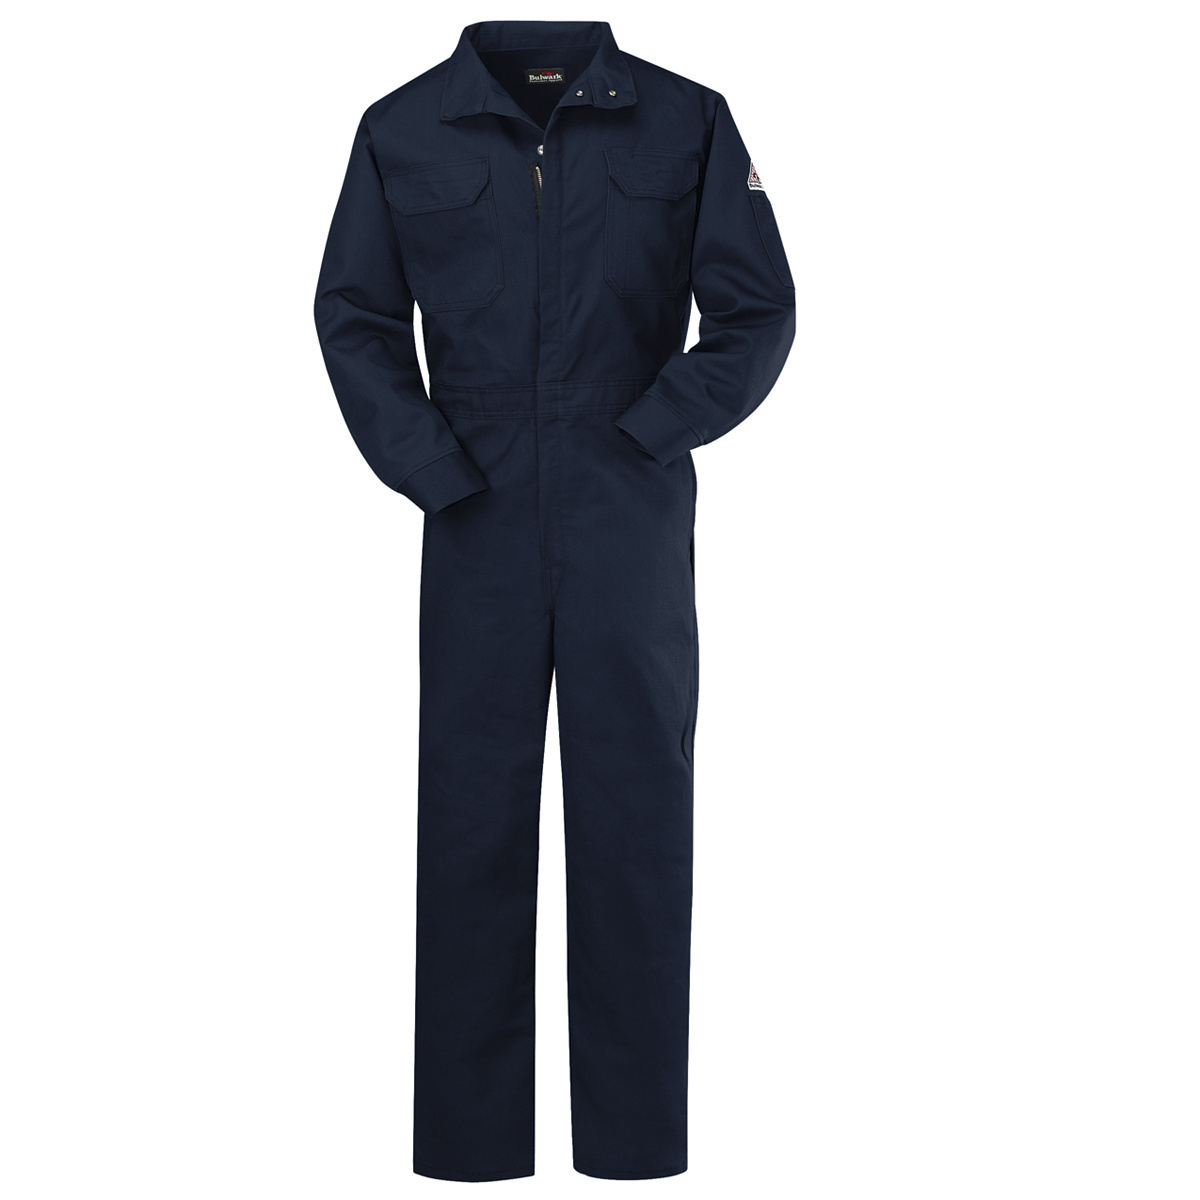 Bulwark® 50 Regular Navy Blue Westex Ultrasoft®/Cotton/Nylon Flame Resistant Coveralls With Zipper Front Closure